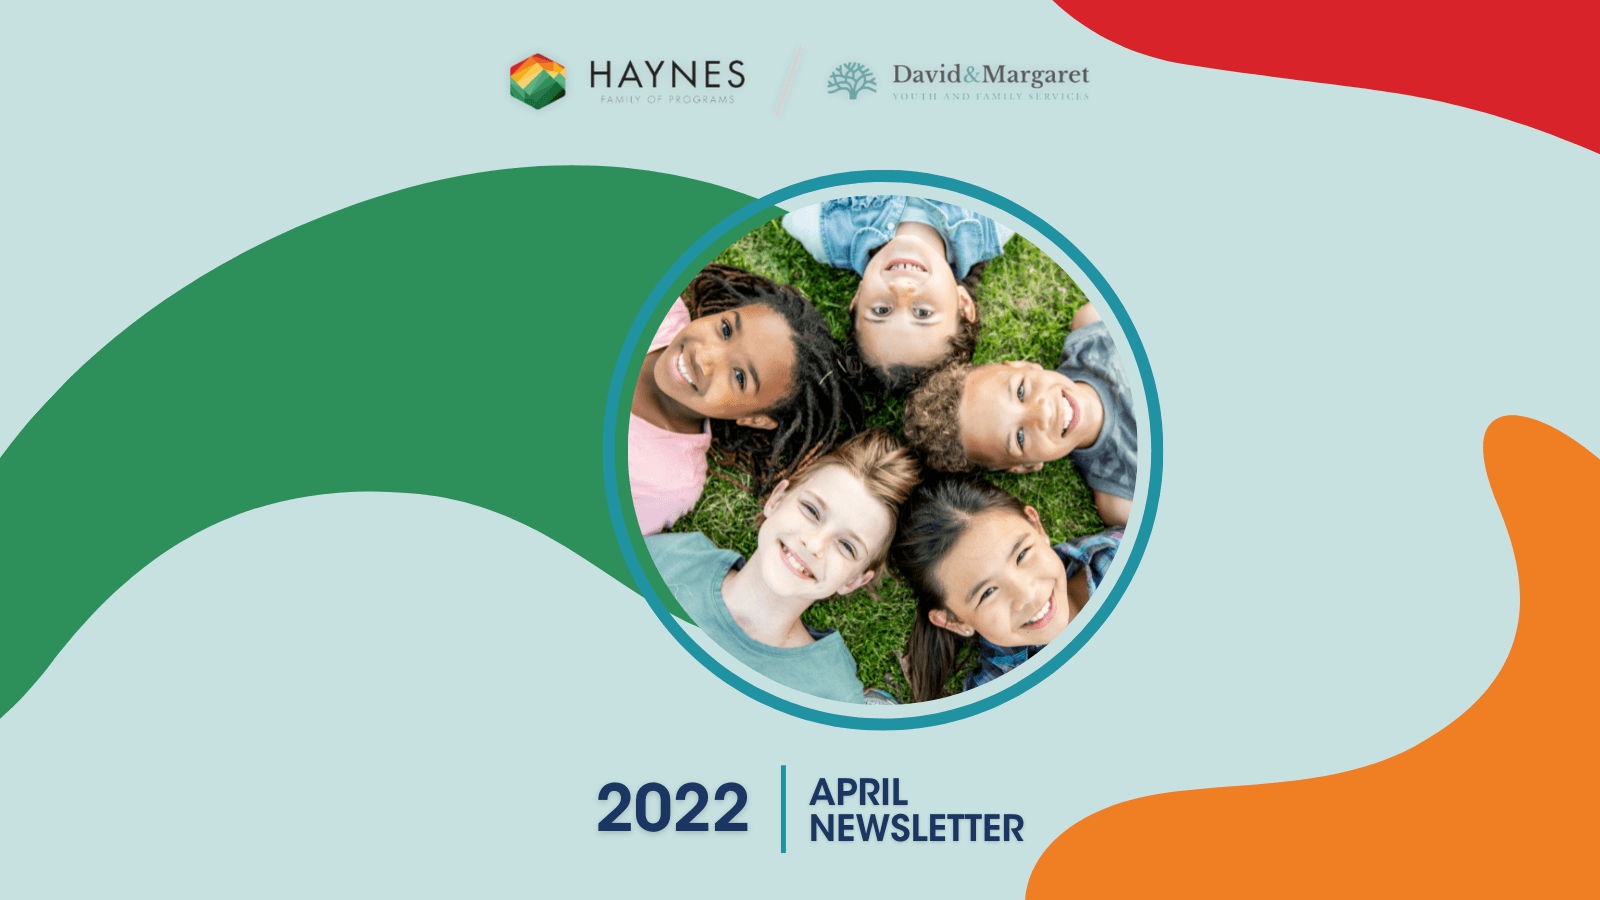 Check out the April 2022 Newsletter!